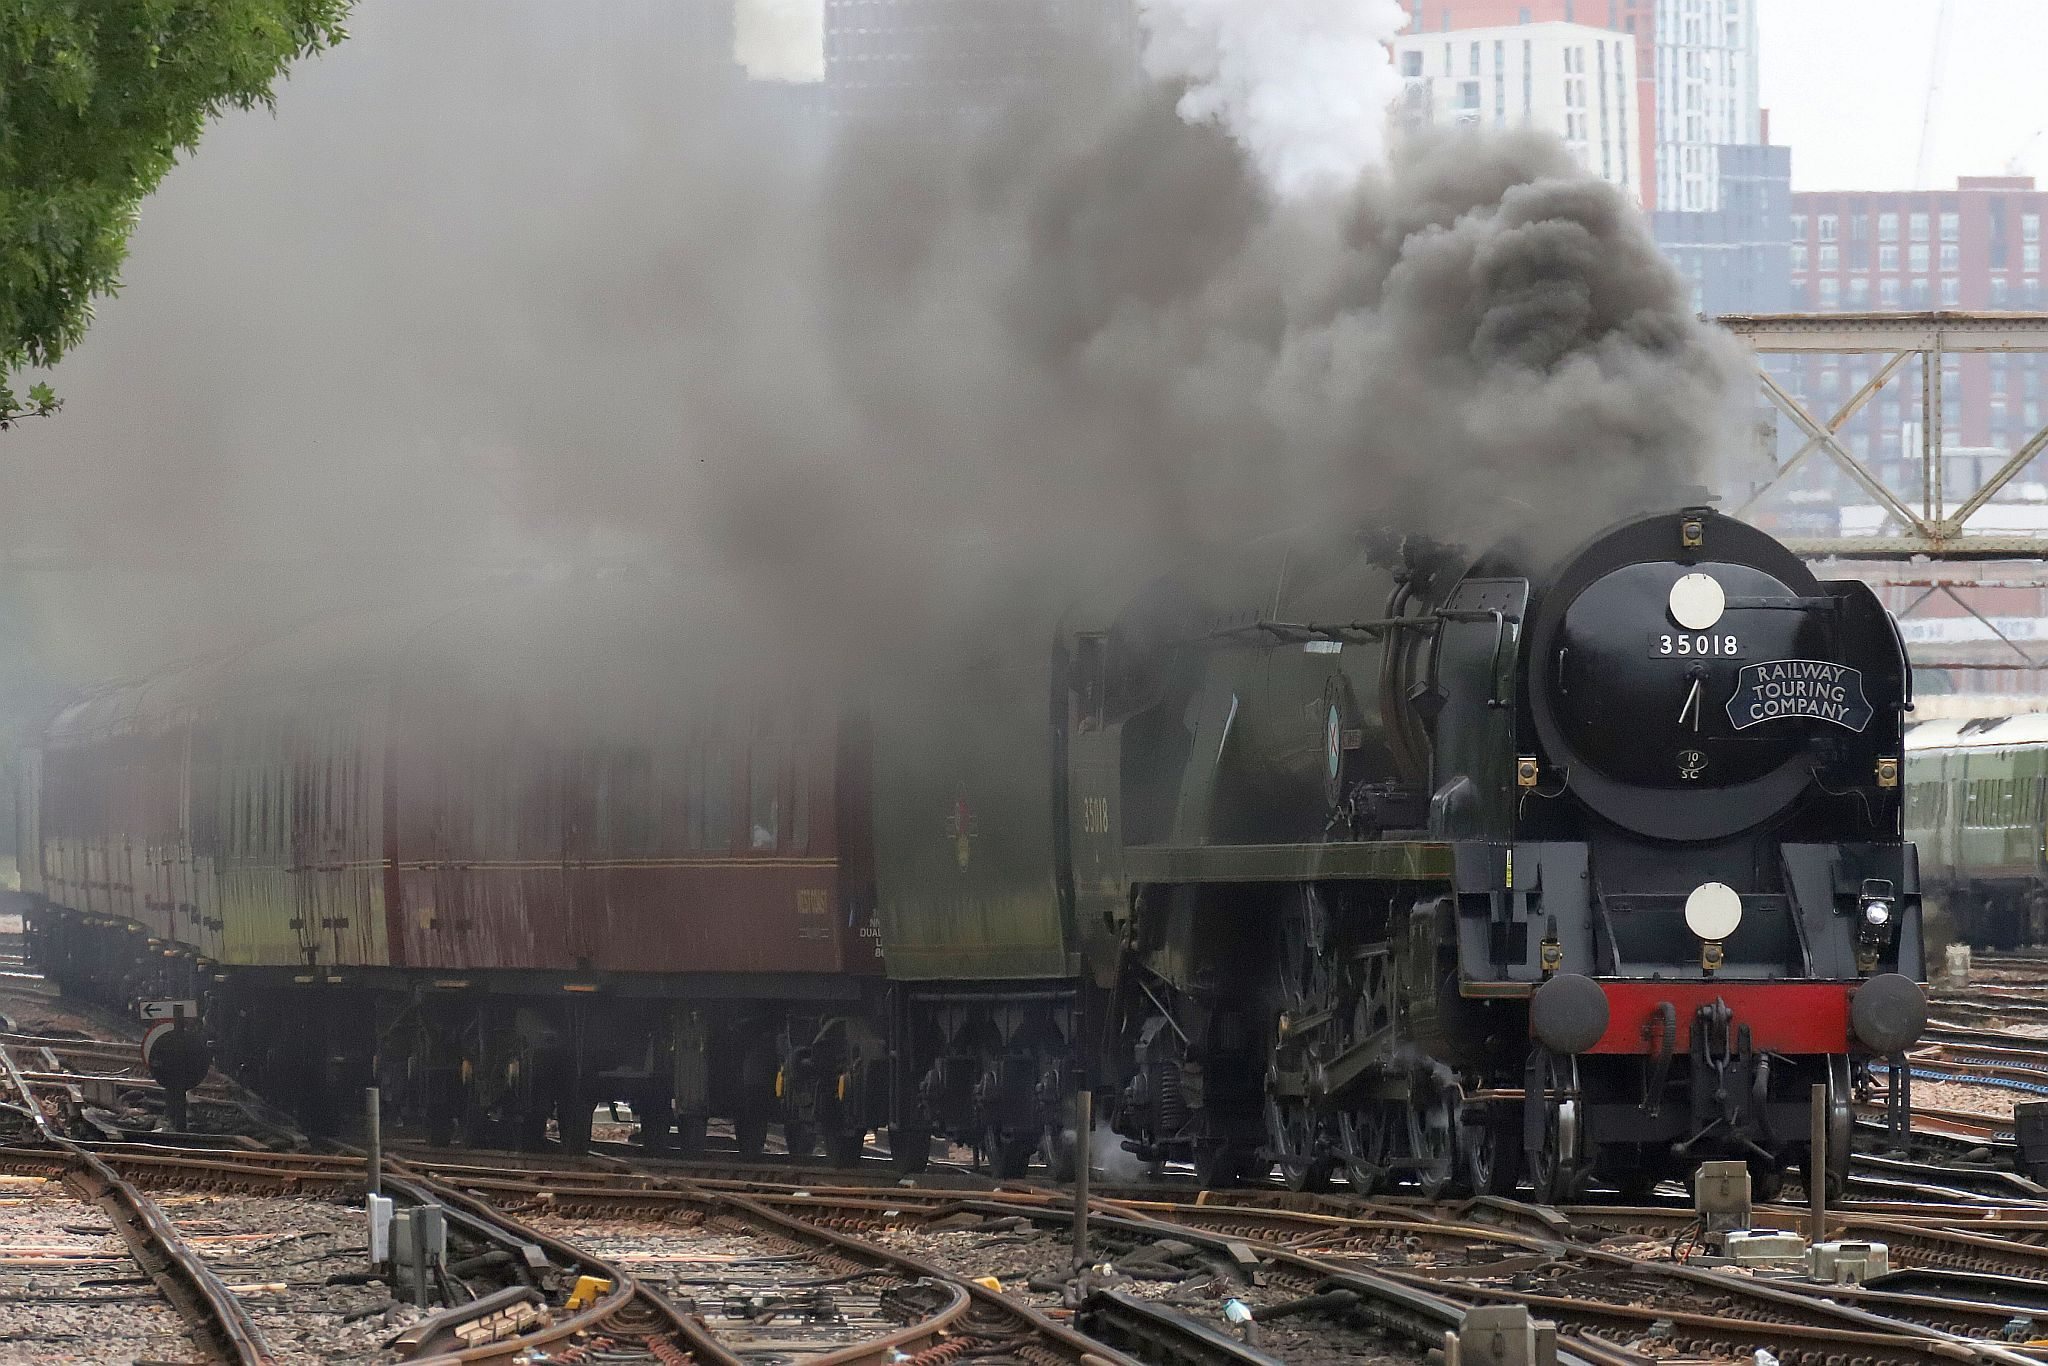 On Sunday 9th July 2023, Southern Railway Merchant Navy Pacific steam engine 35018 "British India Line", slows to negotiate the trackwork at Clapham Junction having climbed up the line from London Victoria at 09:23 running 18 minutes late.